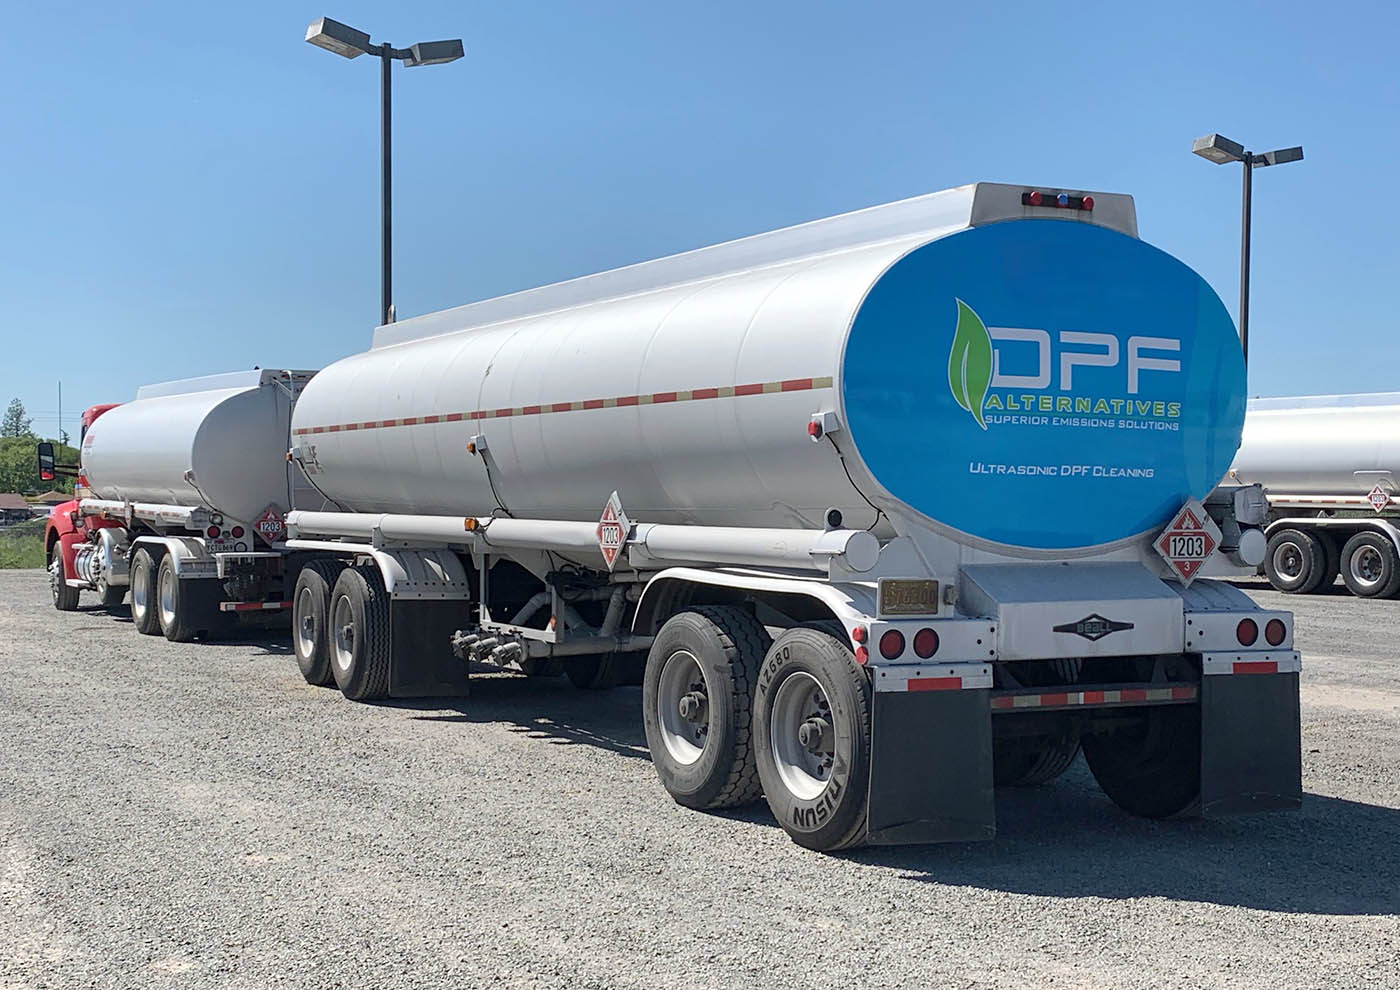 A diesel truck with the dpf logo on the back - your full service dpf shop.